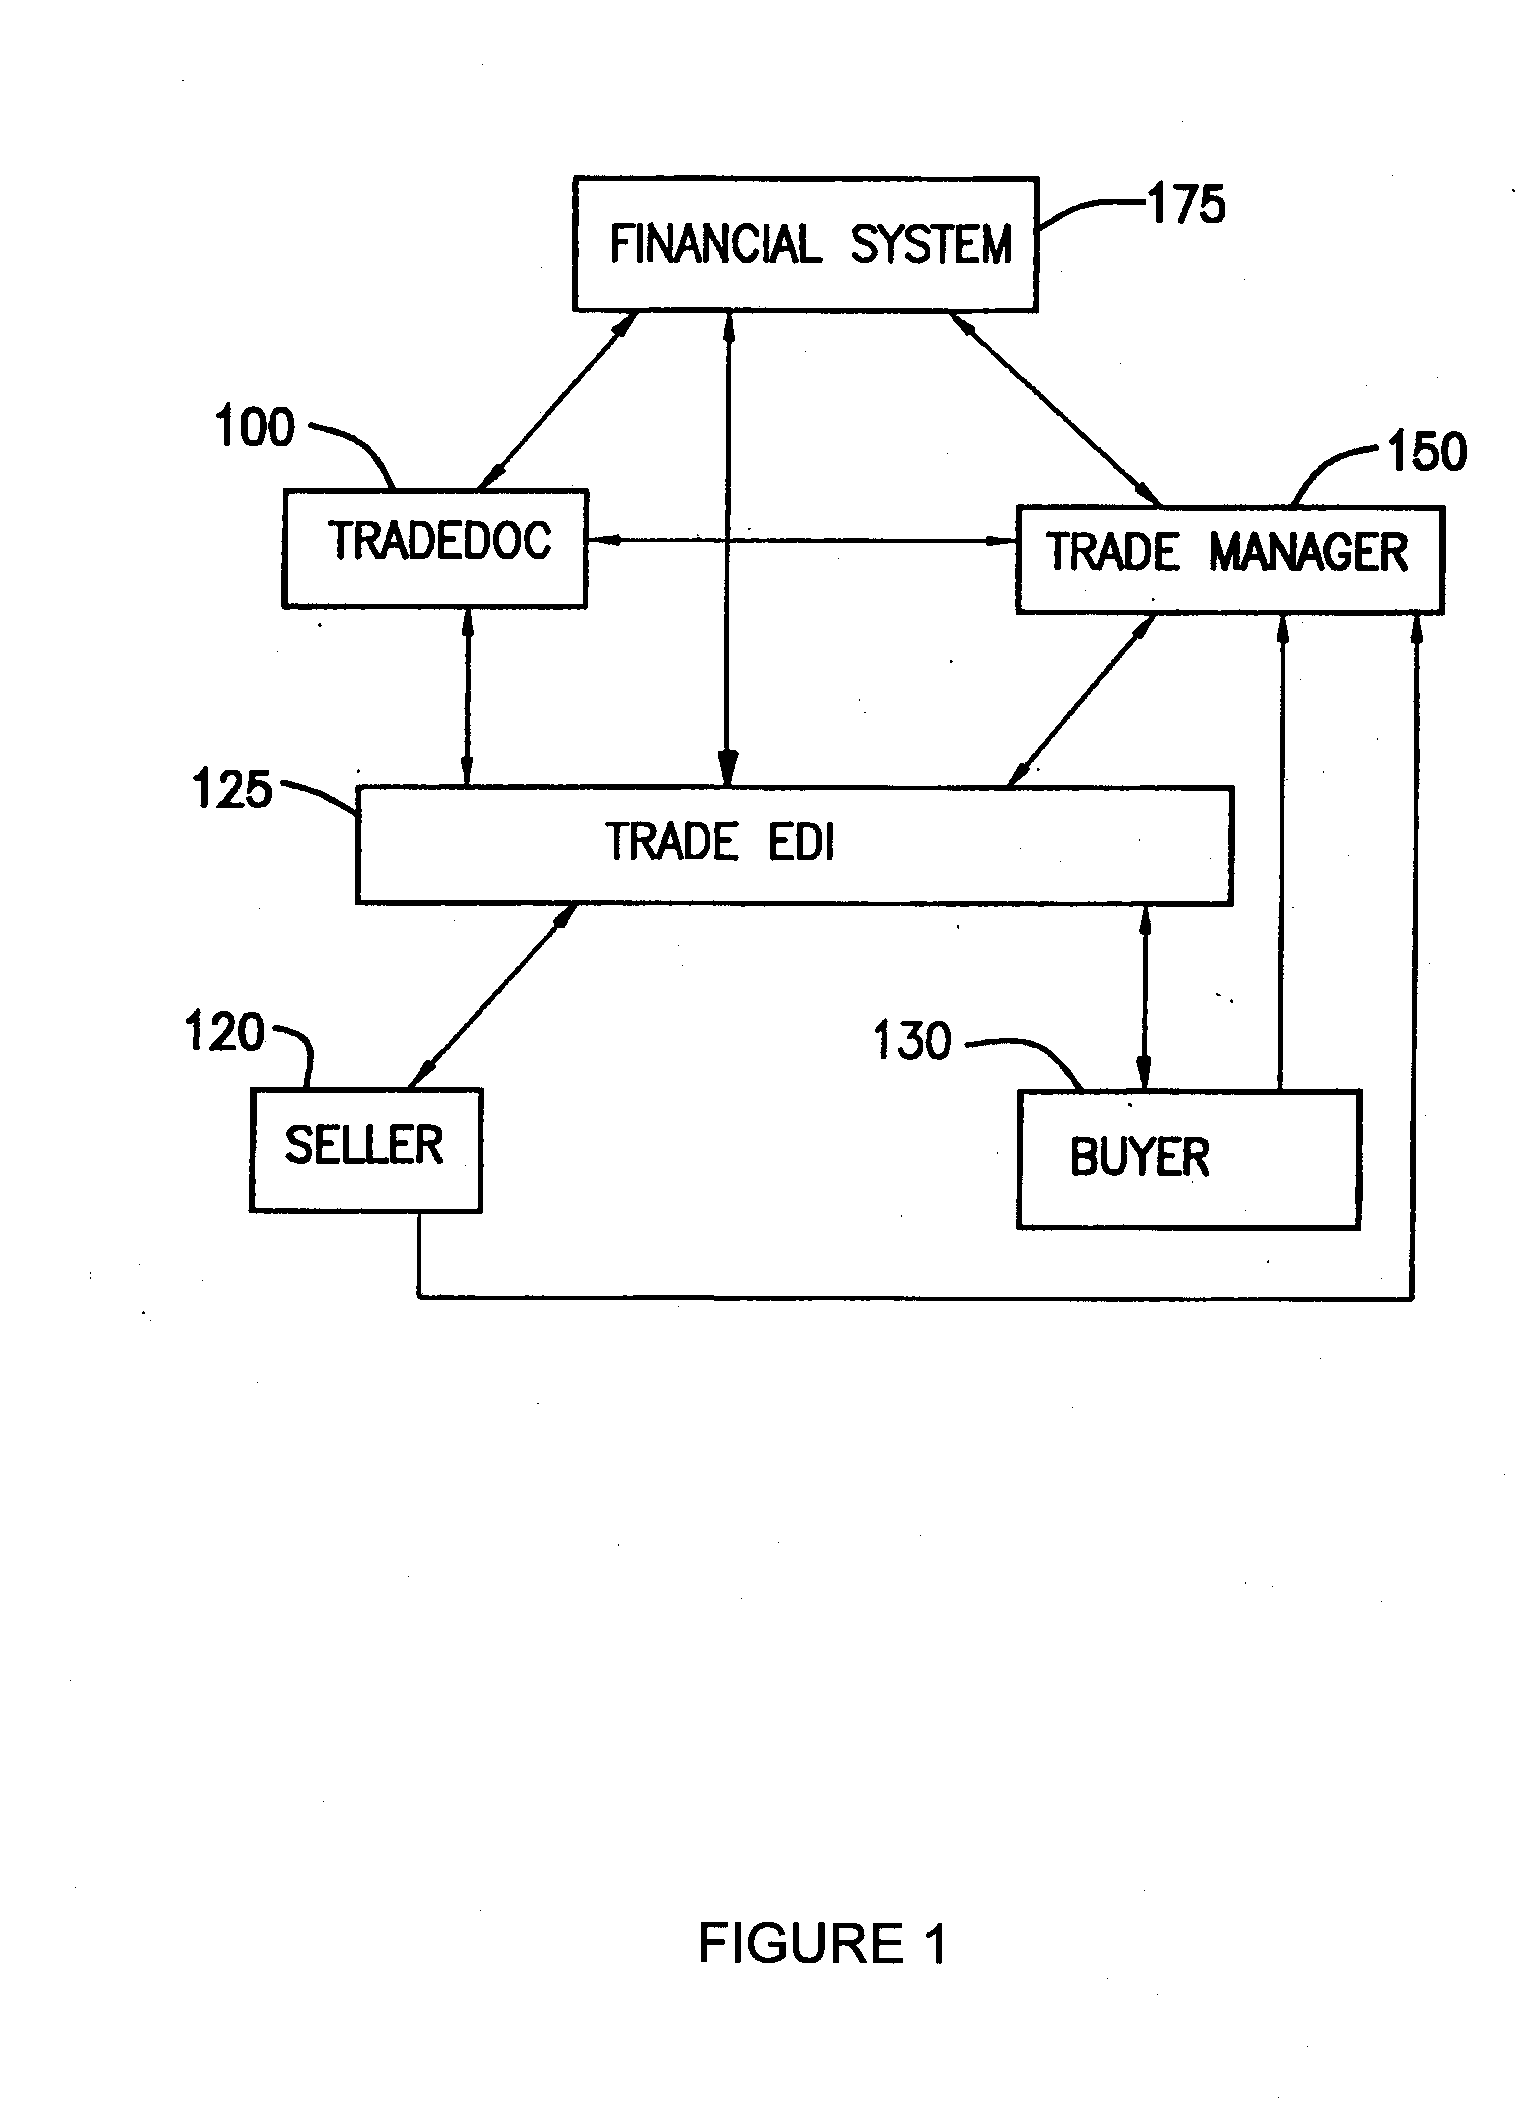 System And Method For Integrating Trading Operations Including The Generation, Processing And Tracking of Trade Documents